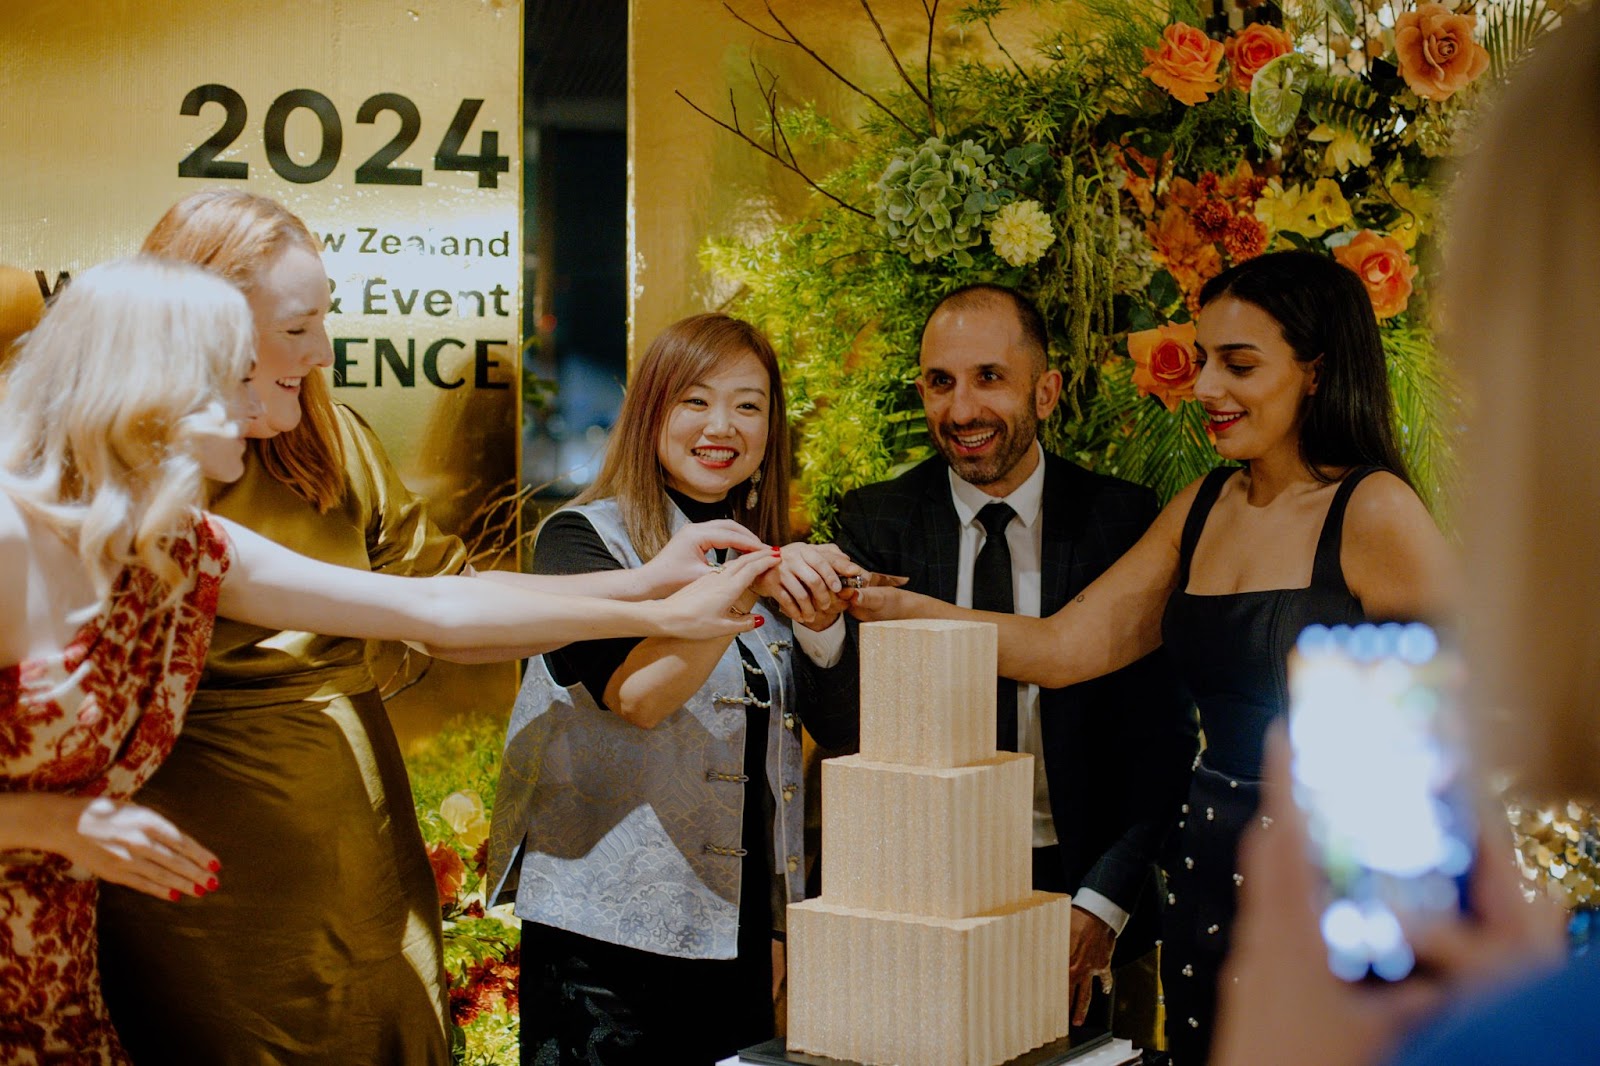 New Zealand Wedding & Event Conference 2024 at Hilton Auckland